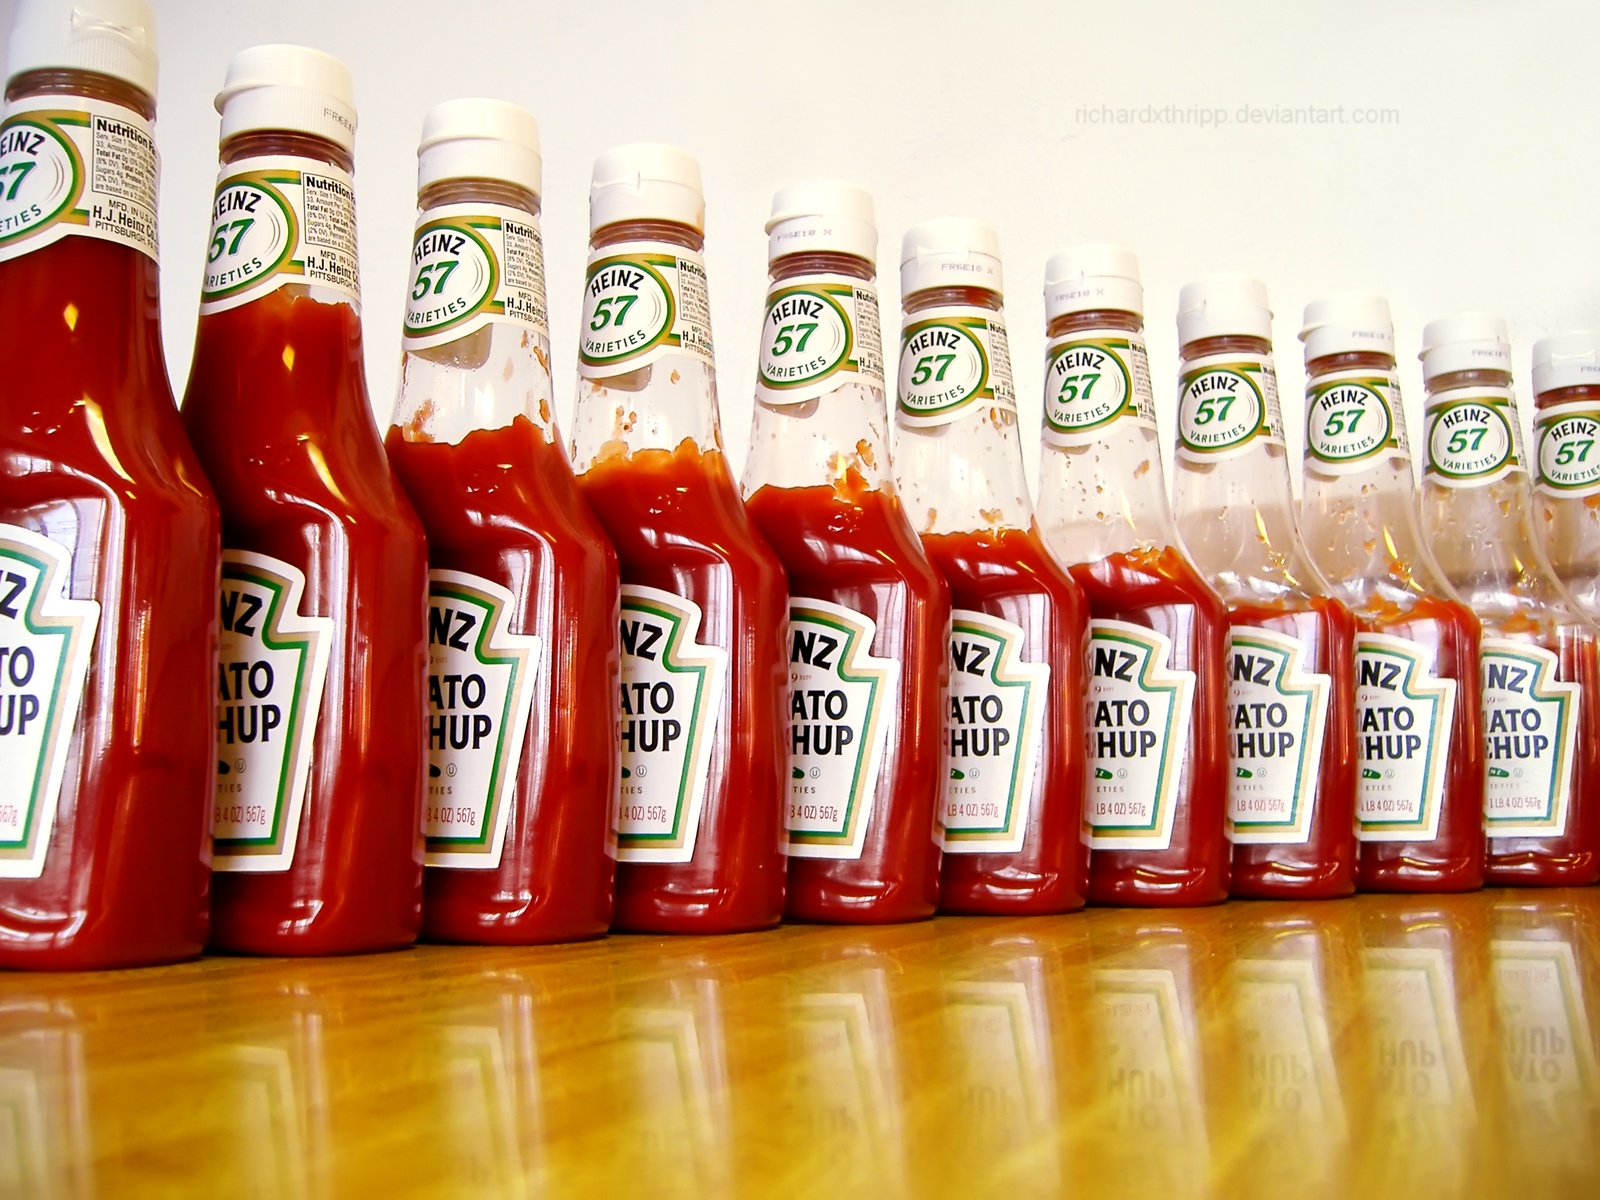 Ketchup bottle on a vibrant background